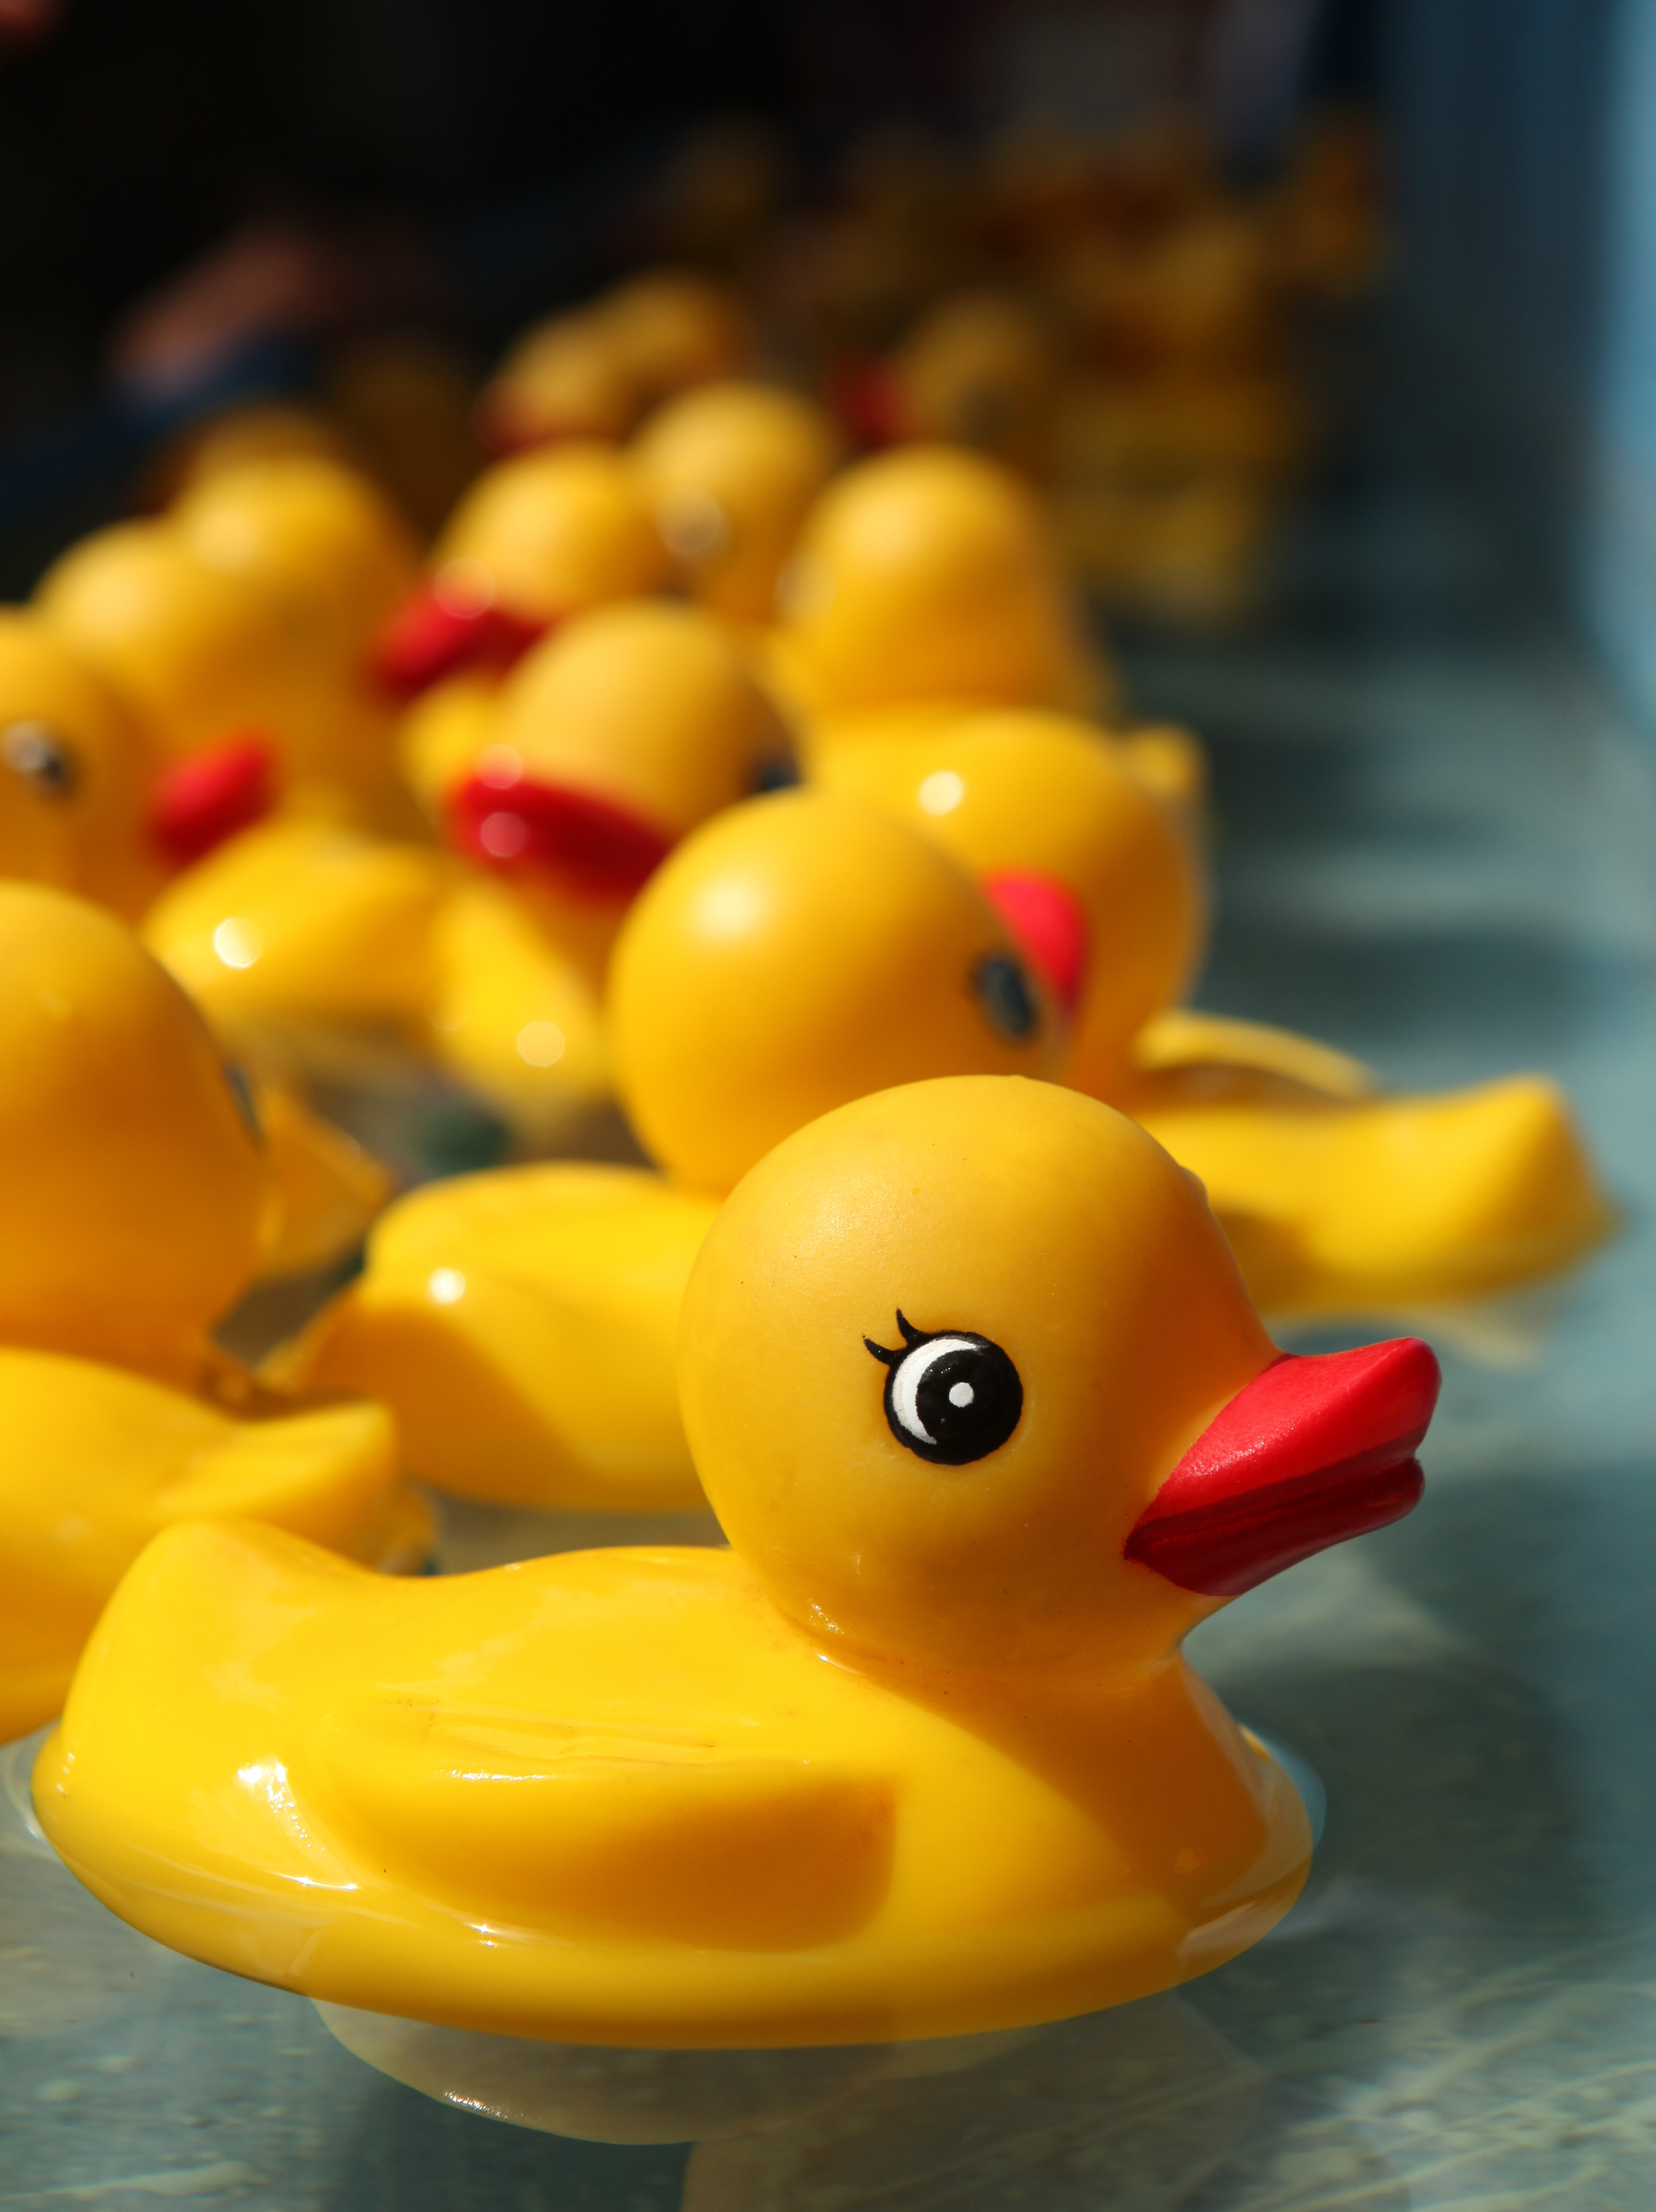 When Rubber Duckies Started Making Bath Time Lots of Fun